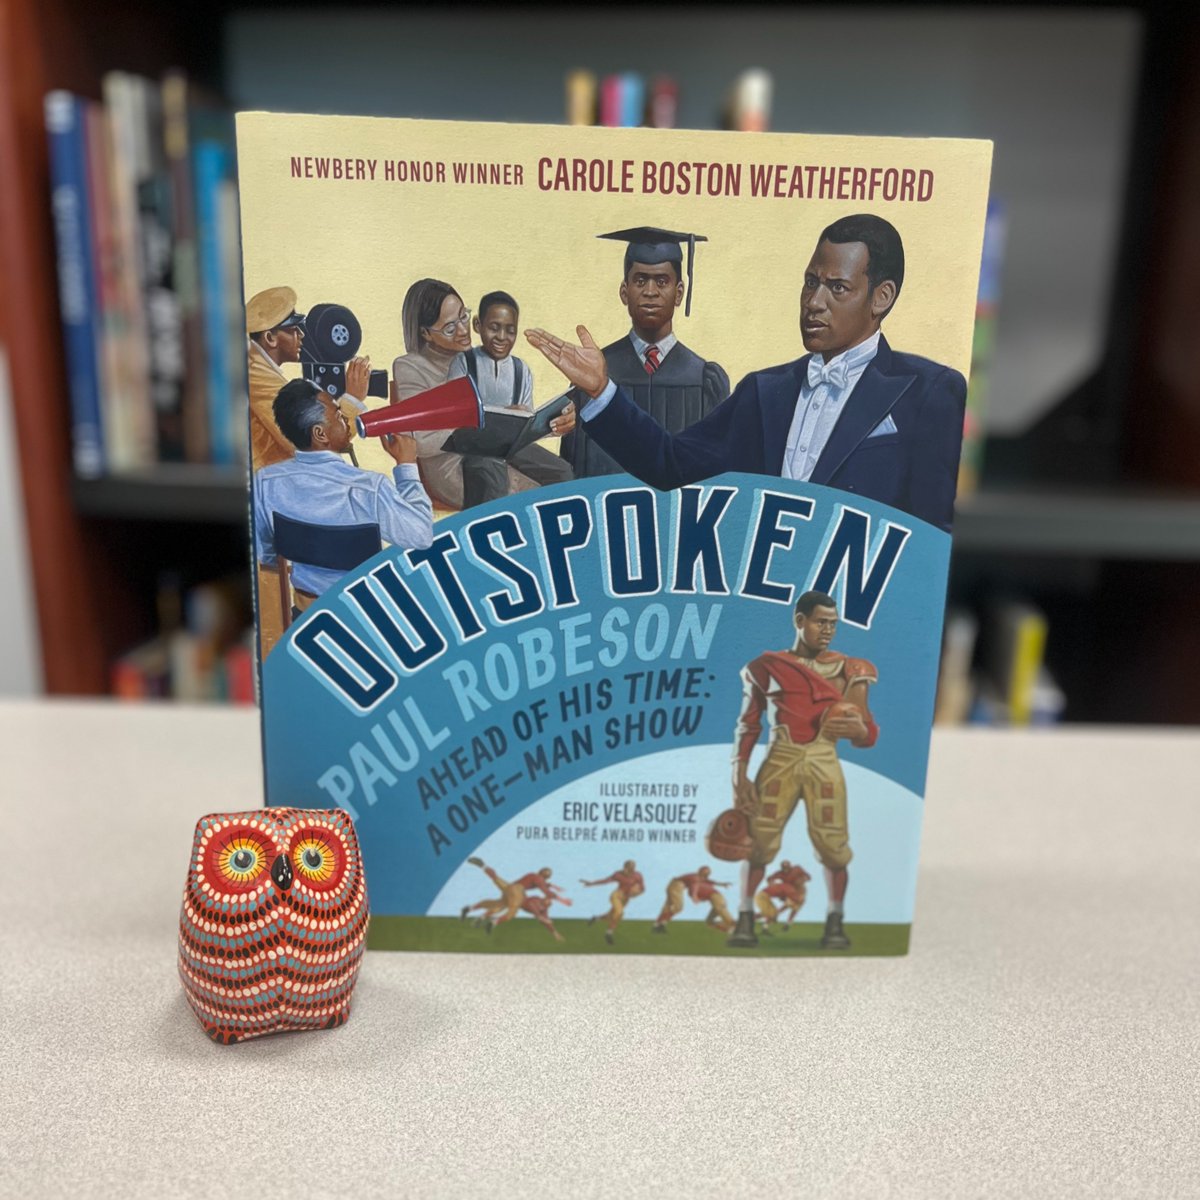 📚📢 Outspoken: Paul Robeson, Ahead of His Time: A One-Man Show by Carole Boston Weatherford and illustrated by Eric Velasquez. #dailybutlershelfie #NationalBiographersDay #Outspoken @poetweatherford @ericvelasquezny @Candlewick